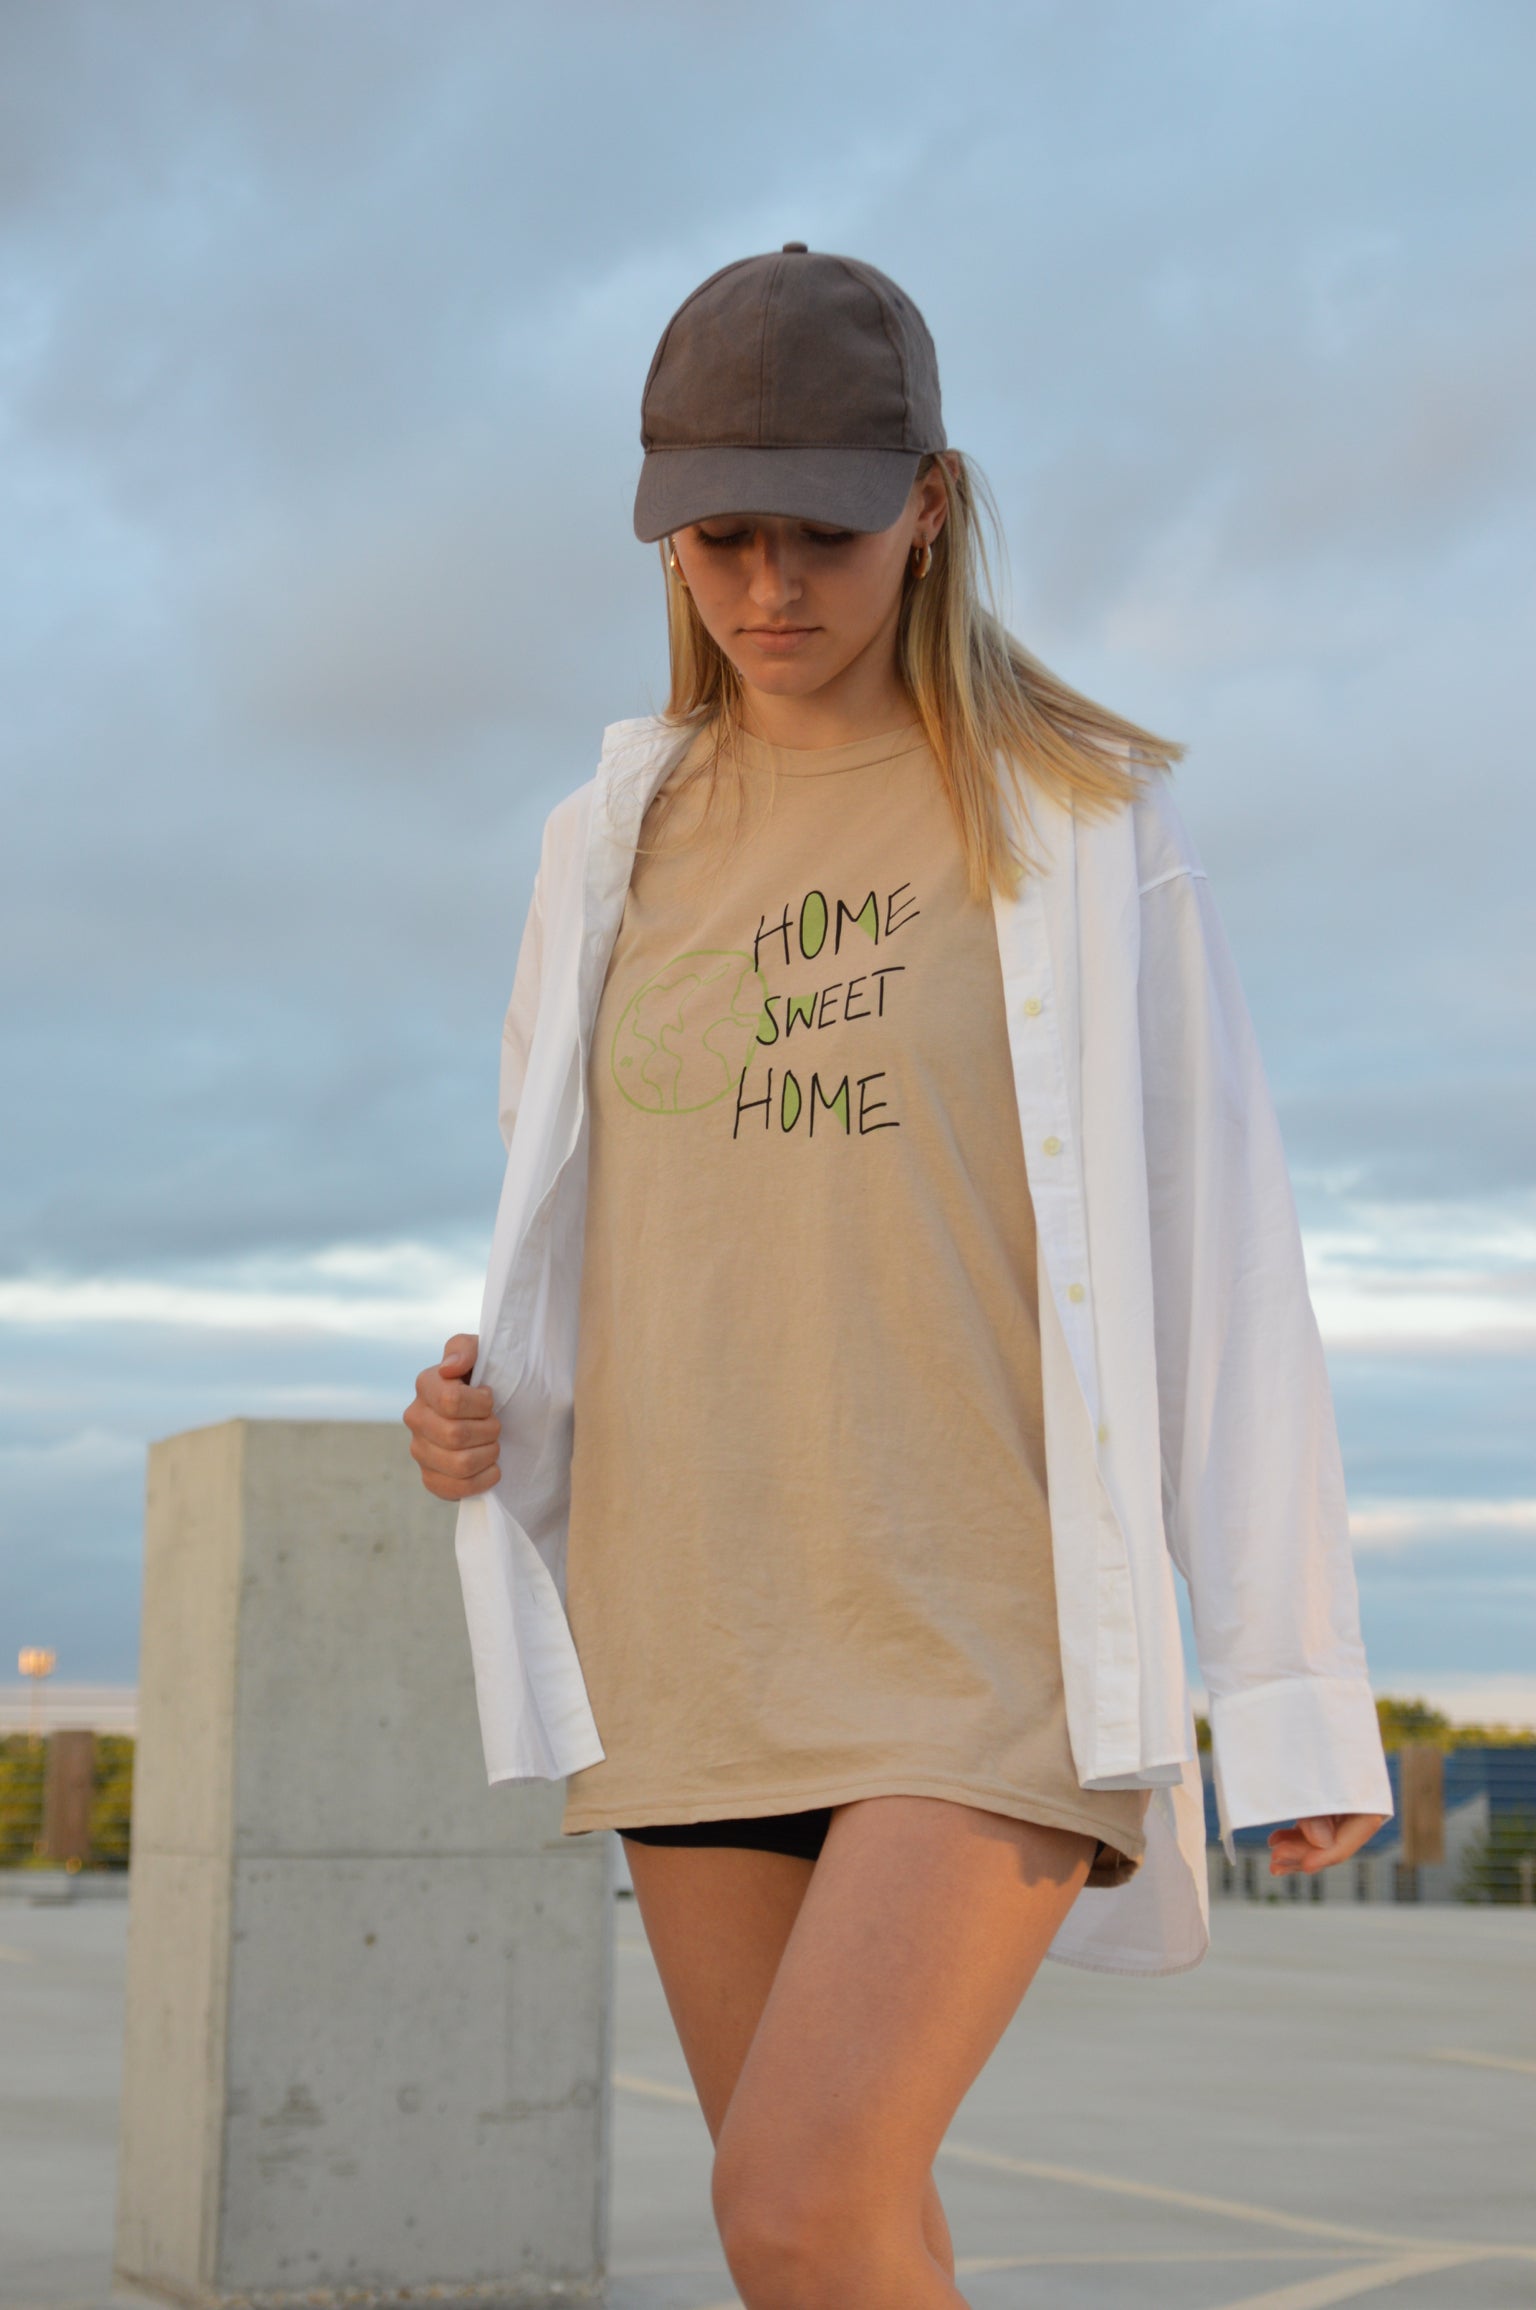 Home Sweet Home t-shirt on model